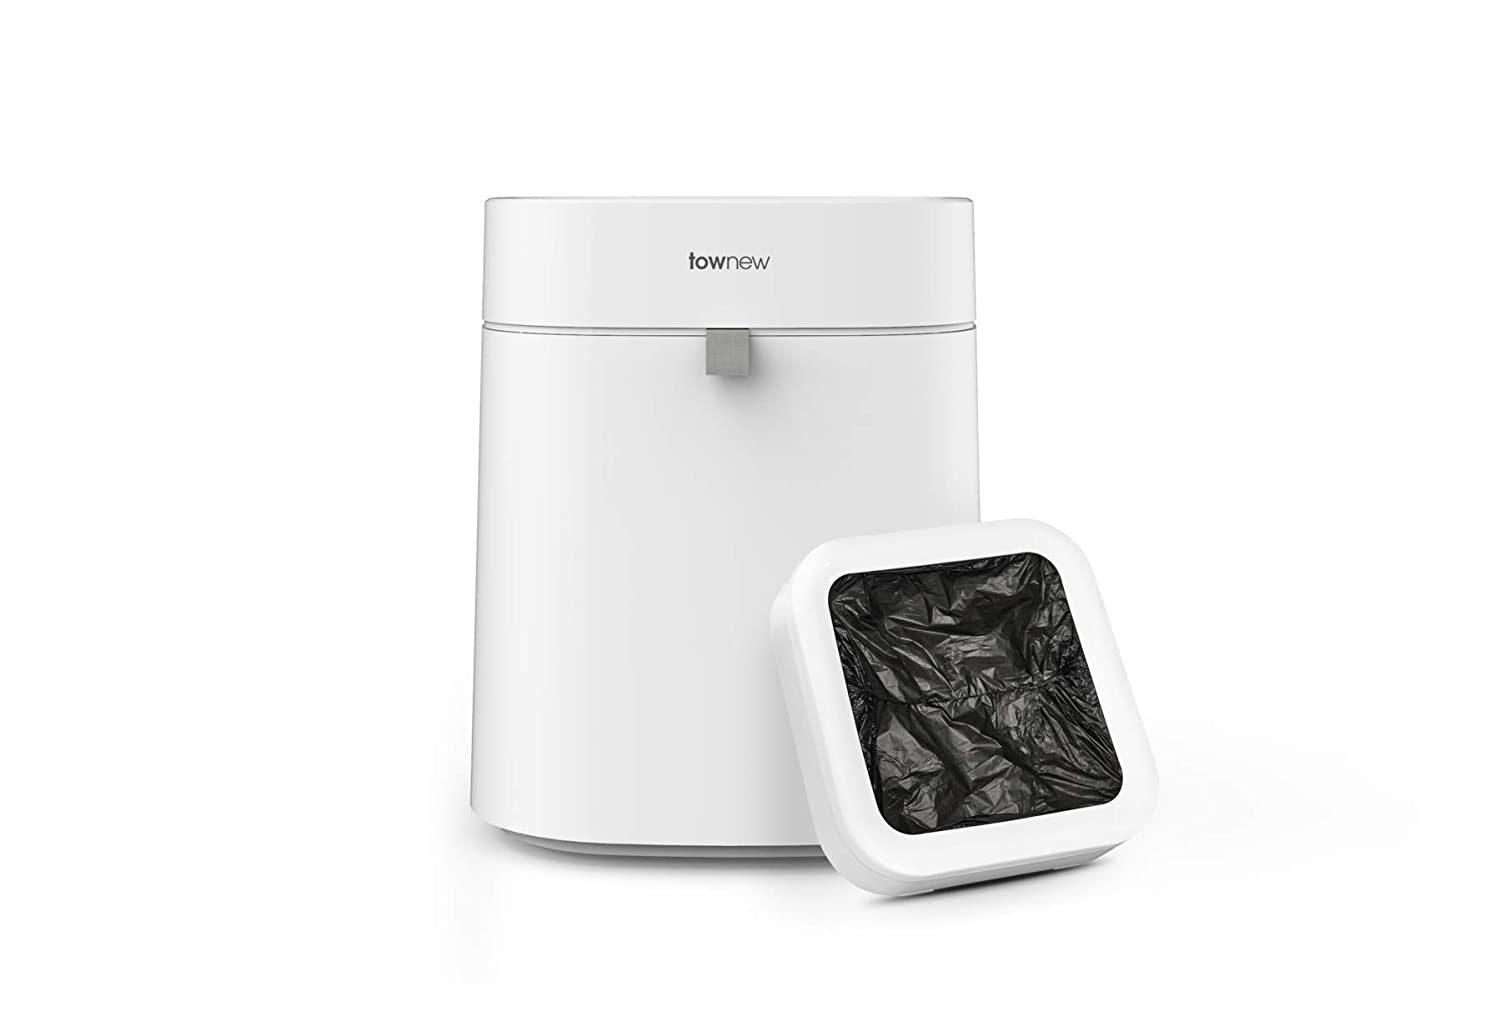 Townew Improves Home Hygiene With Smart Self Sealing Trash Cans ...